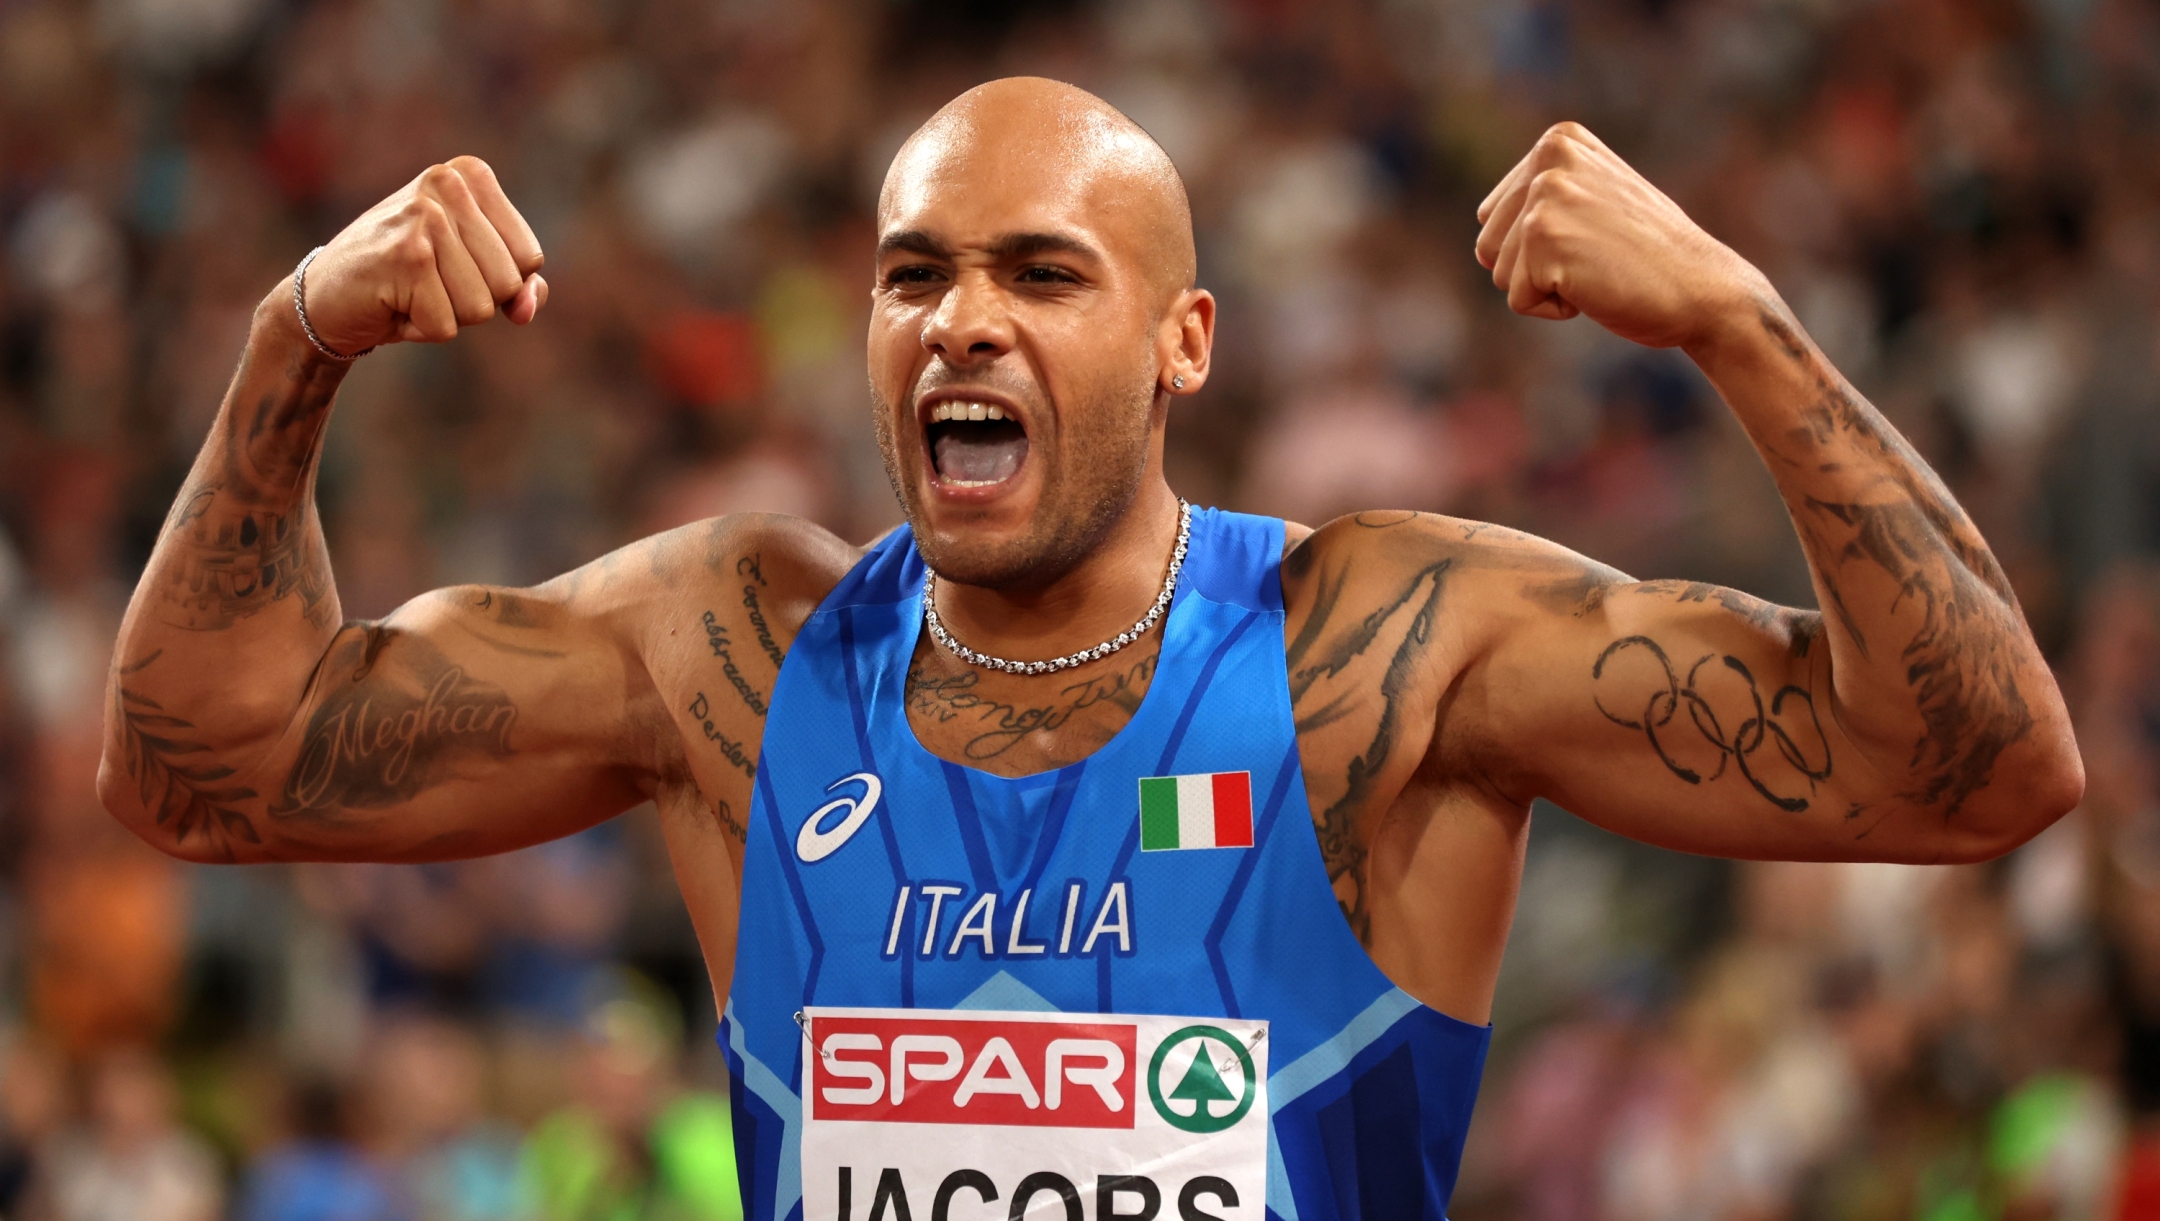 MUNICH, GERMANY - AUGUST 16: Gold medalist Lamont Marcell Jacobs of Italy celebrates after the Athletics - Men's 100m Final on day 6 of the European Championships Munich 2022 at Olympiapark on August 16, 2022 in Munich, Germany. (Photo by Alexander Hassenstein/Getty Images)